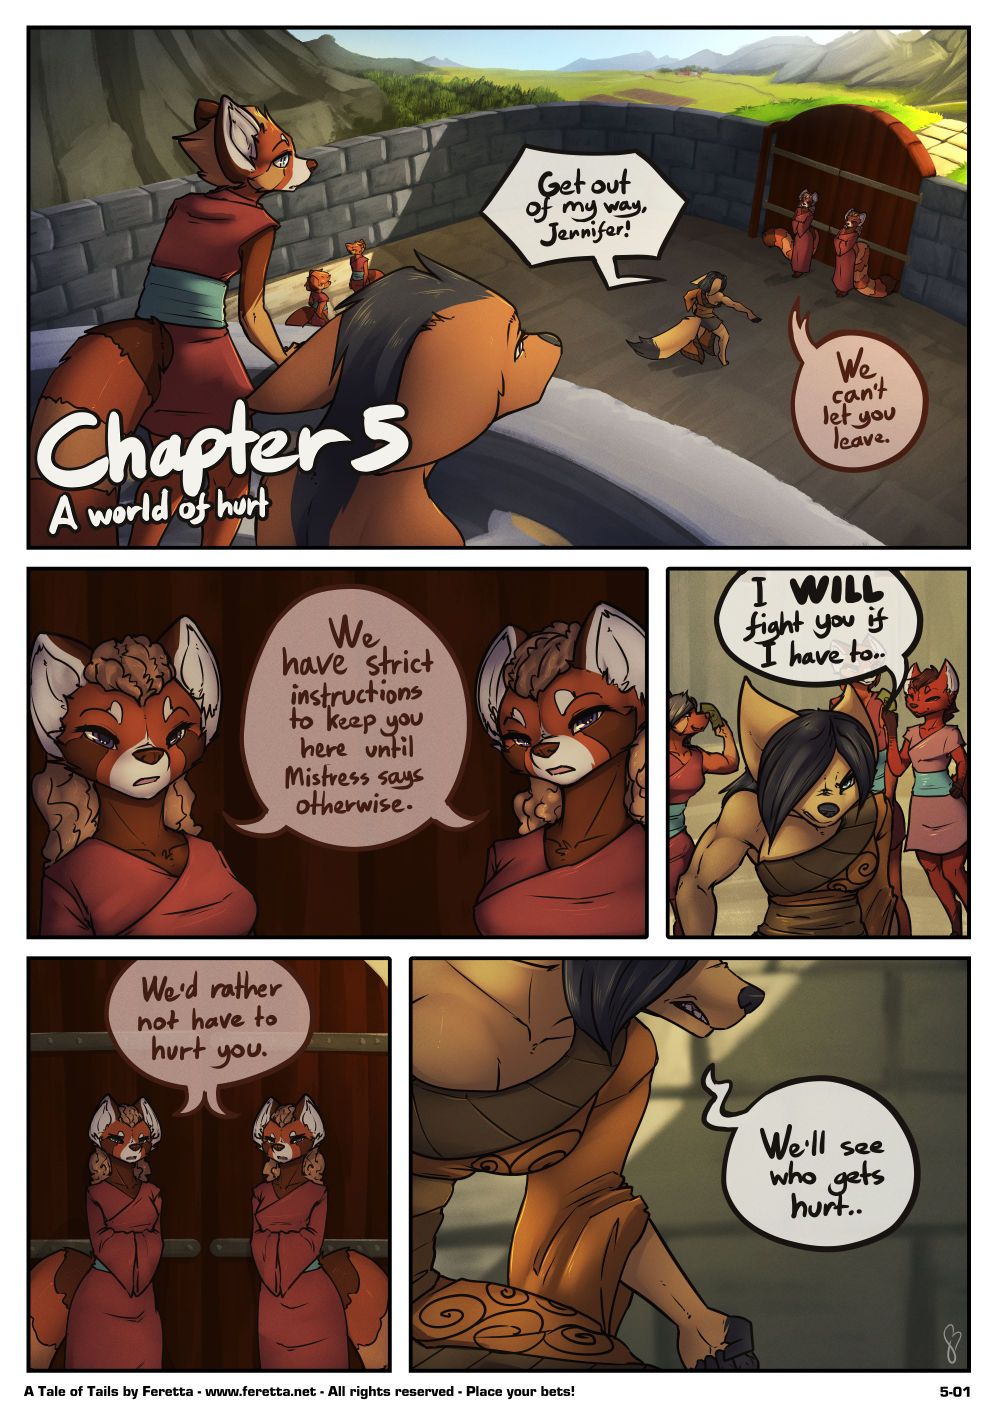 [Feretta] A Tale of Tails: Chapter 5 - A World of Hurt (ongoing) 1